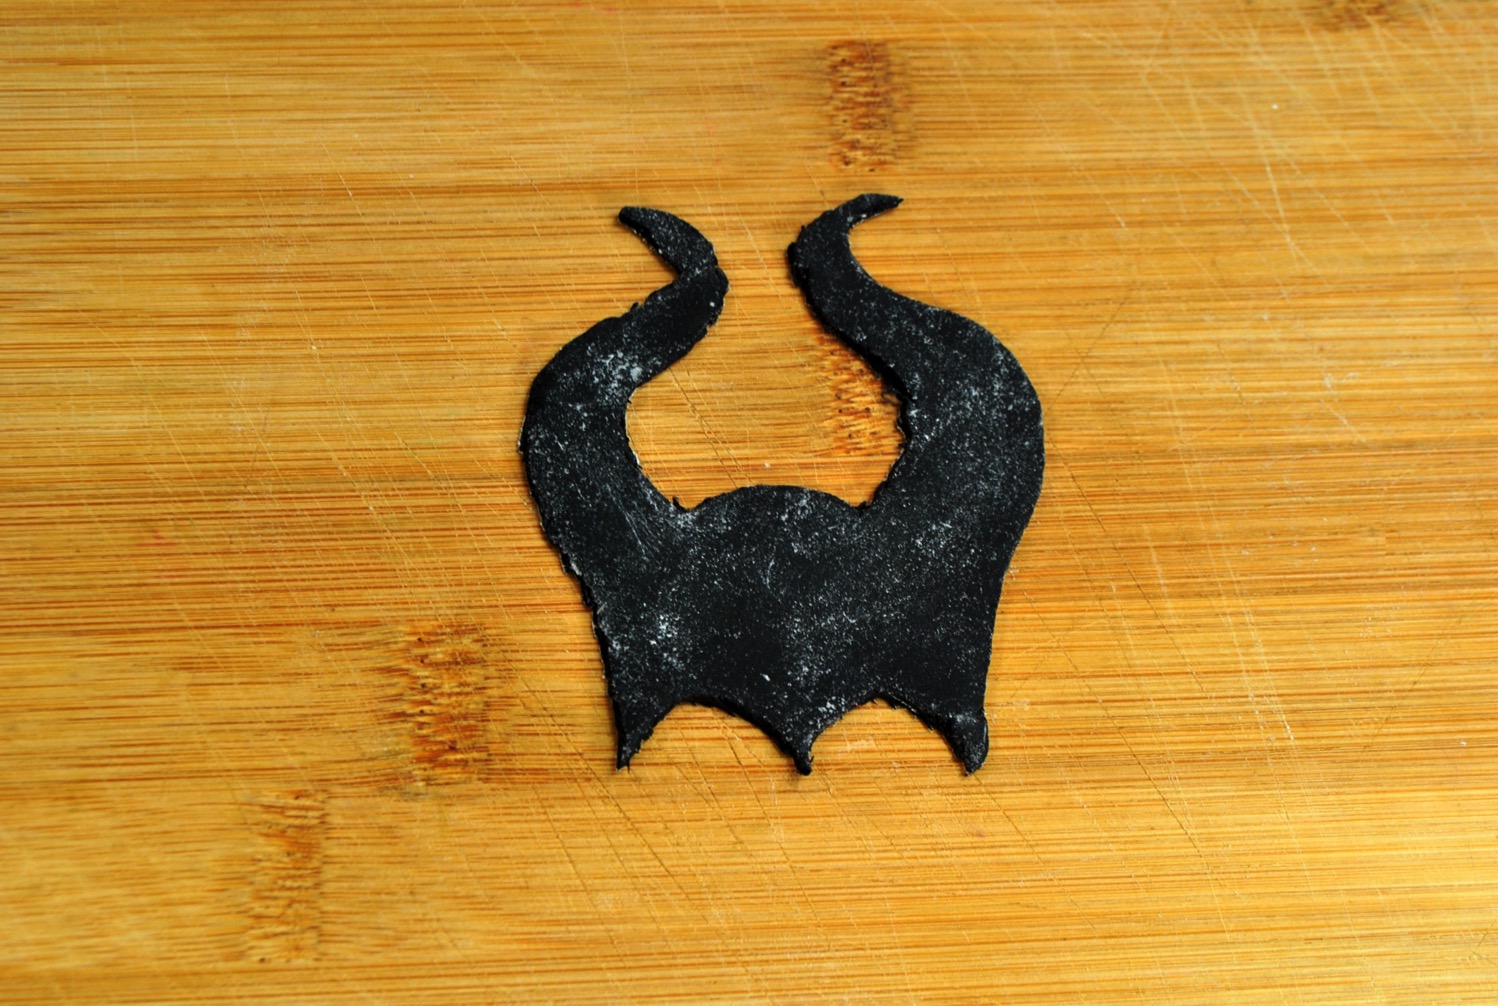 maleficent horns from fondant for Maleficent Donut